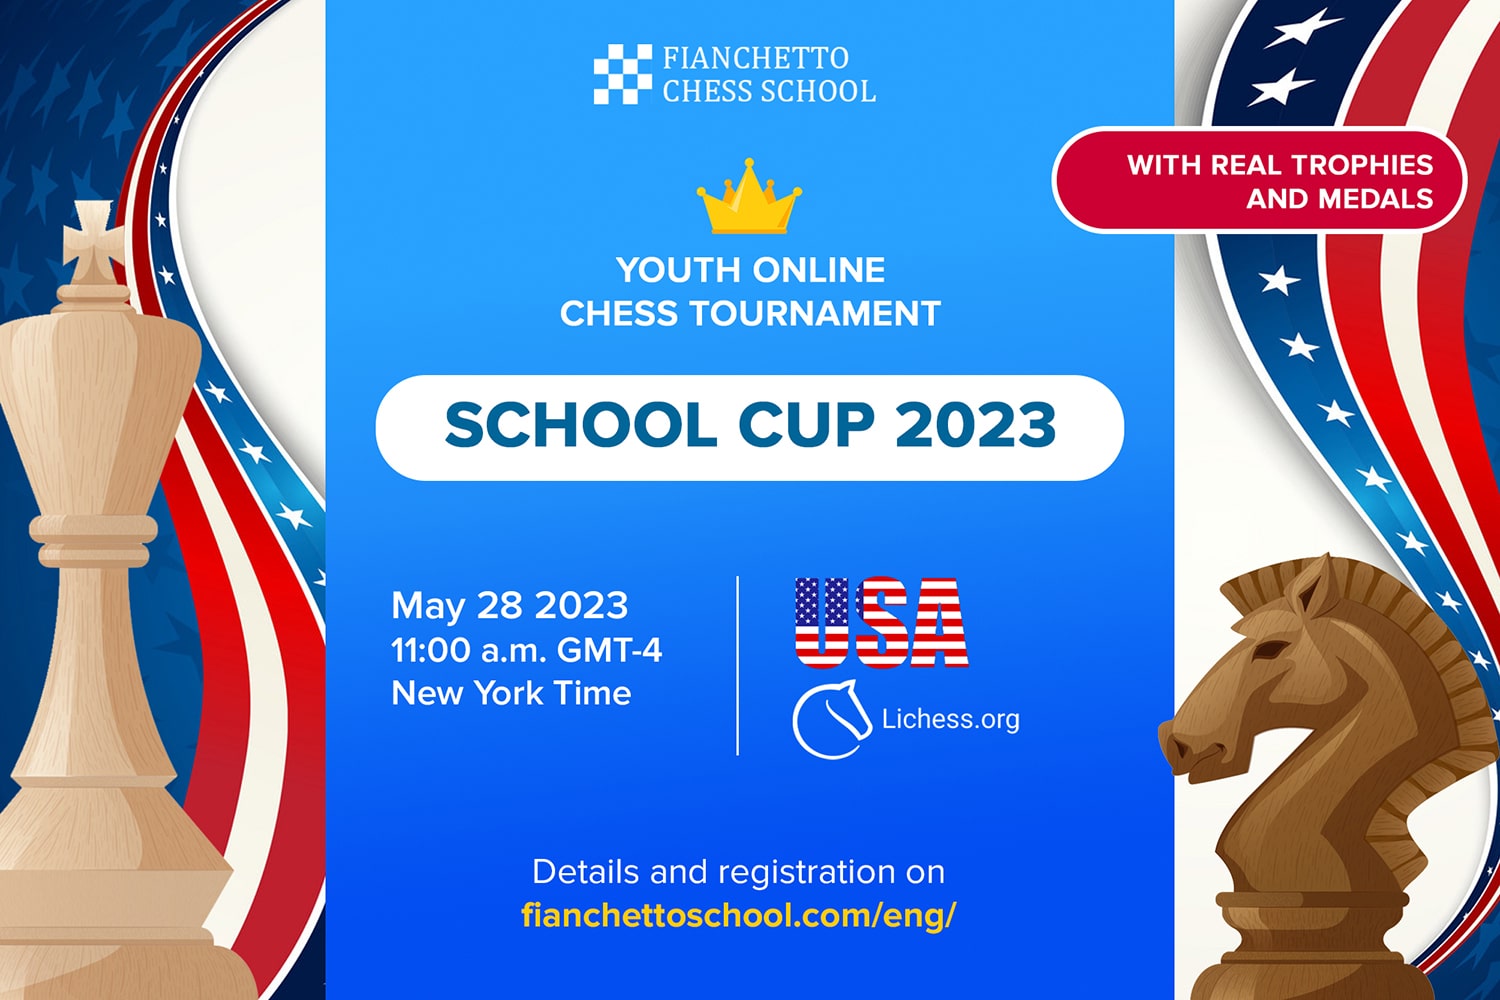 FIANCHETTO SCHOOL CHESS CUP 2023 USA - ONLINE YOUTH TOURNAMENT